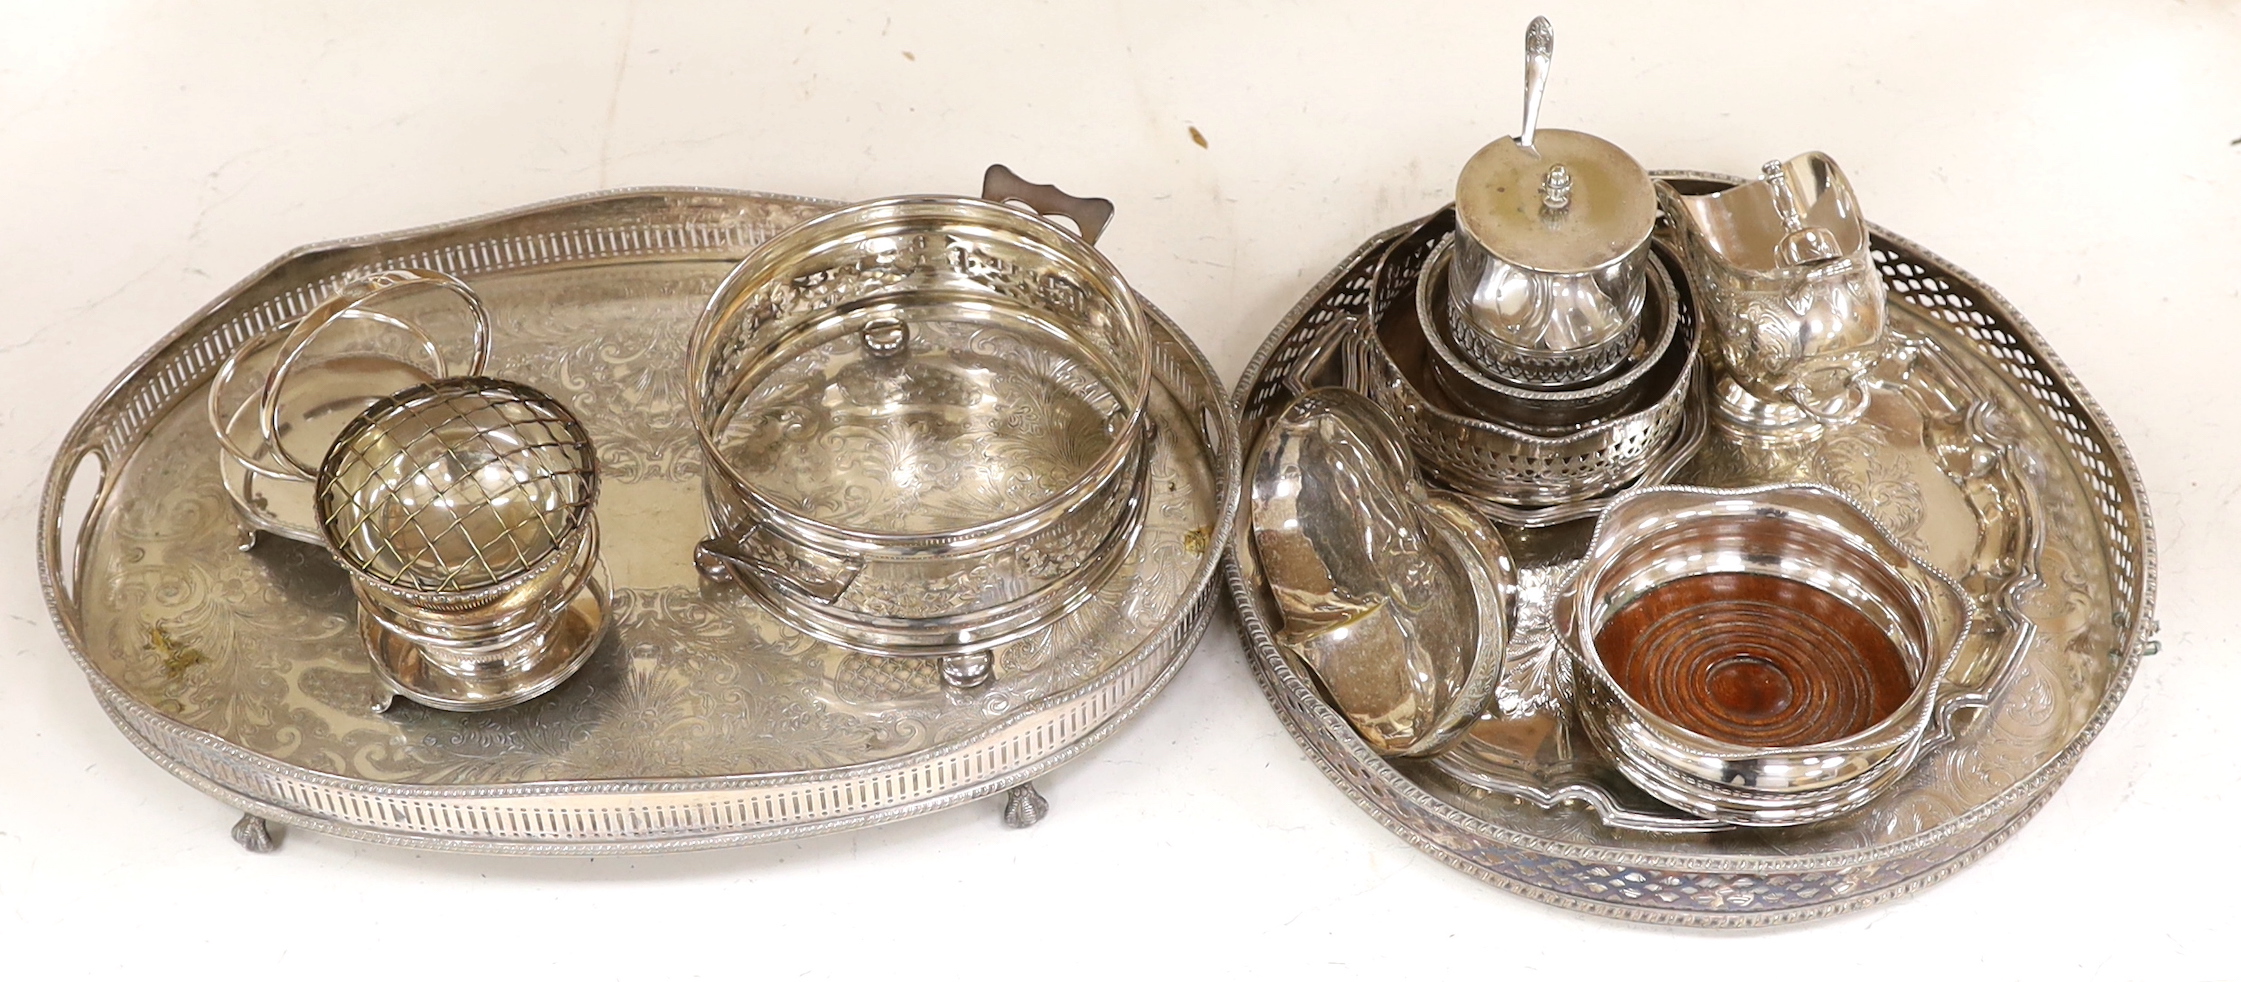 A quantity of silver plate including two trays with pierced galleries, a wine coaster, condiment serving pots, etc.